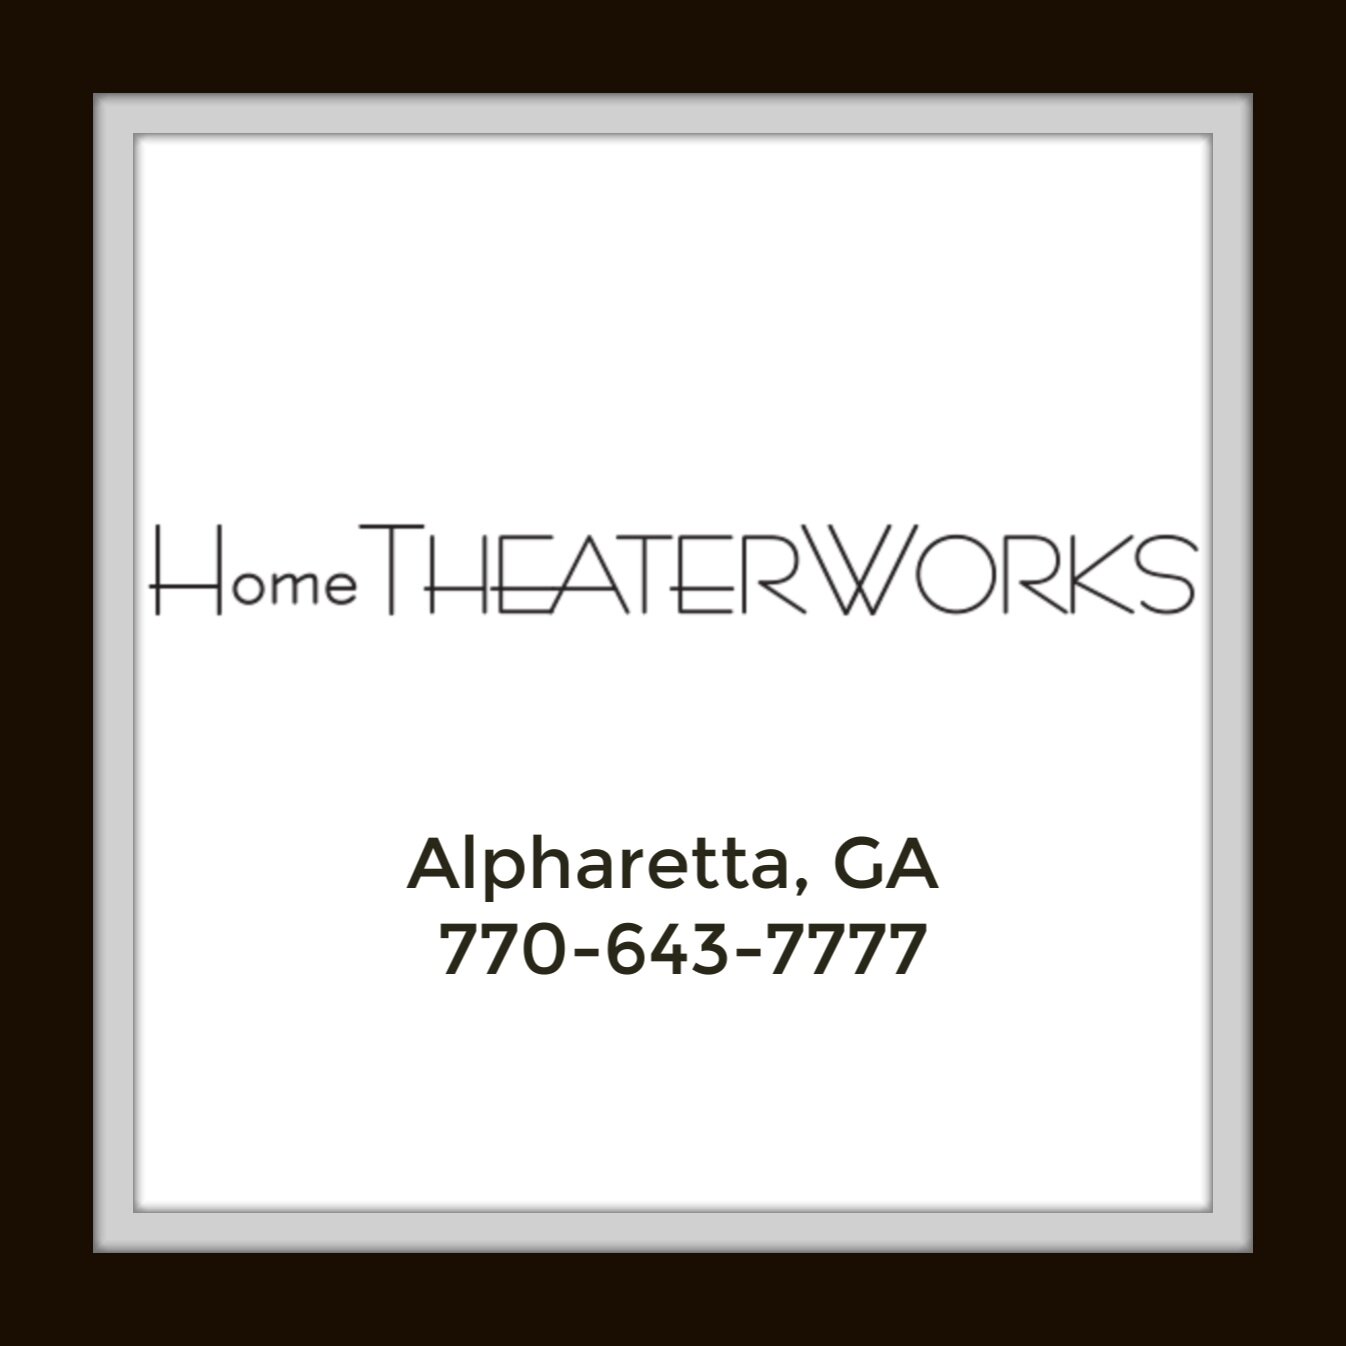 Home TheaterWorks